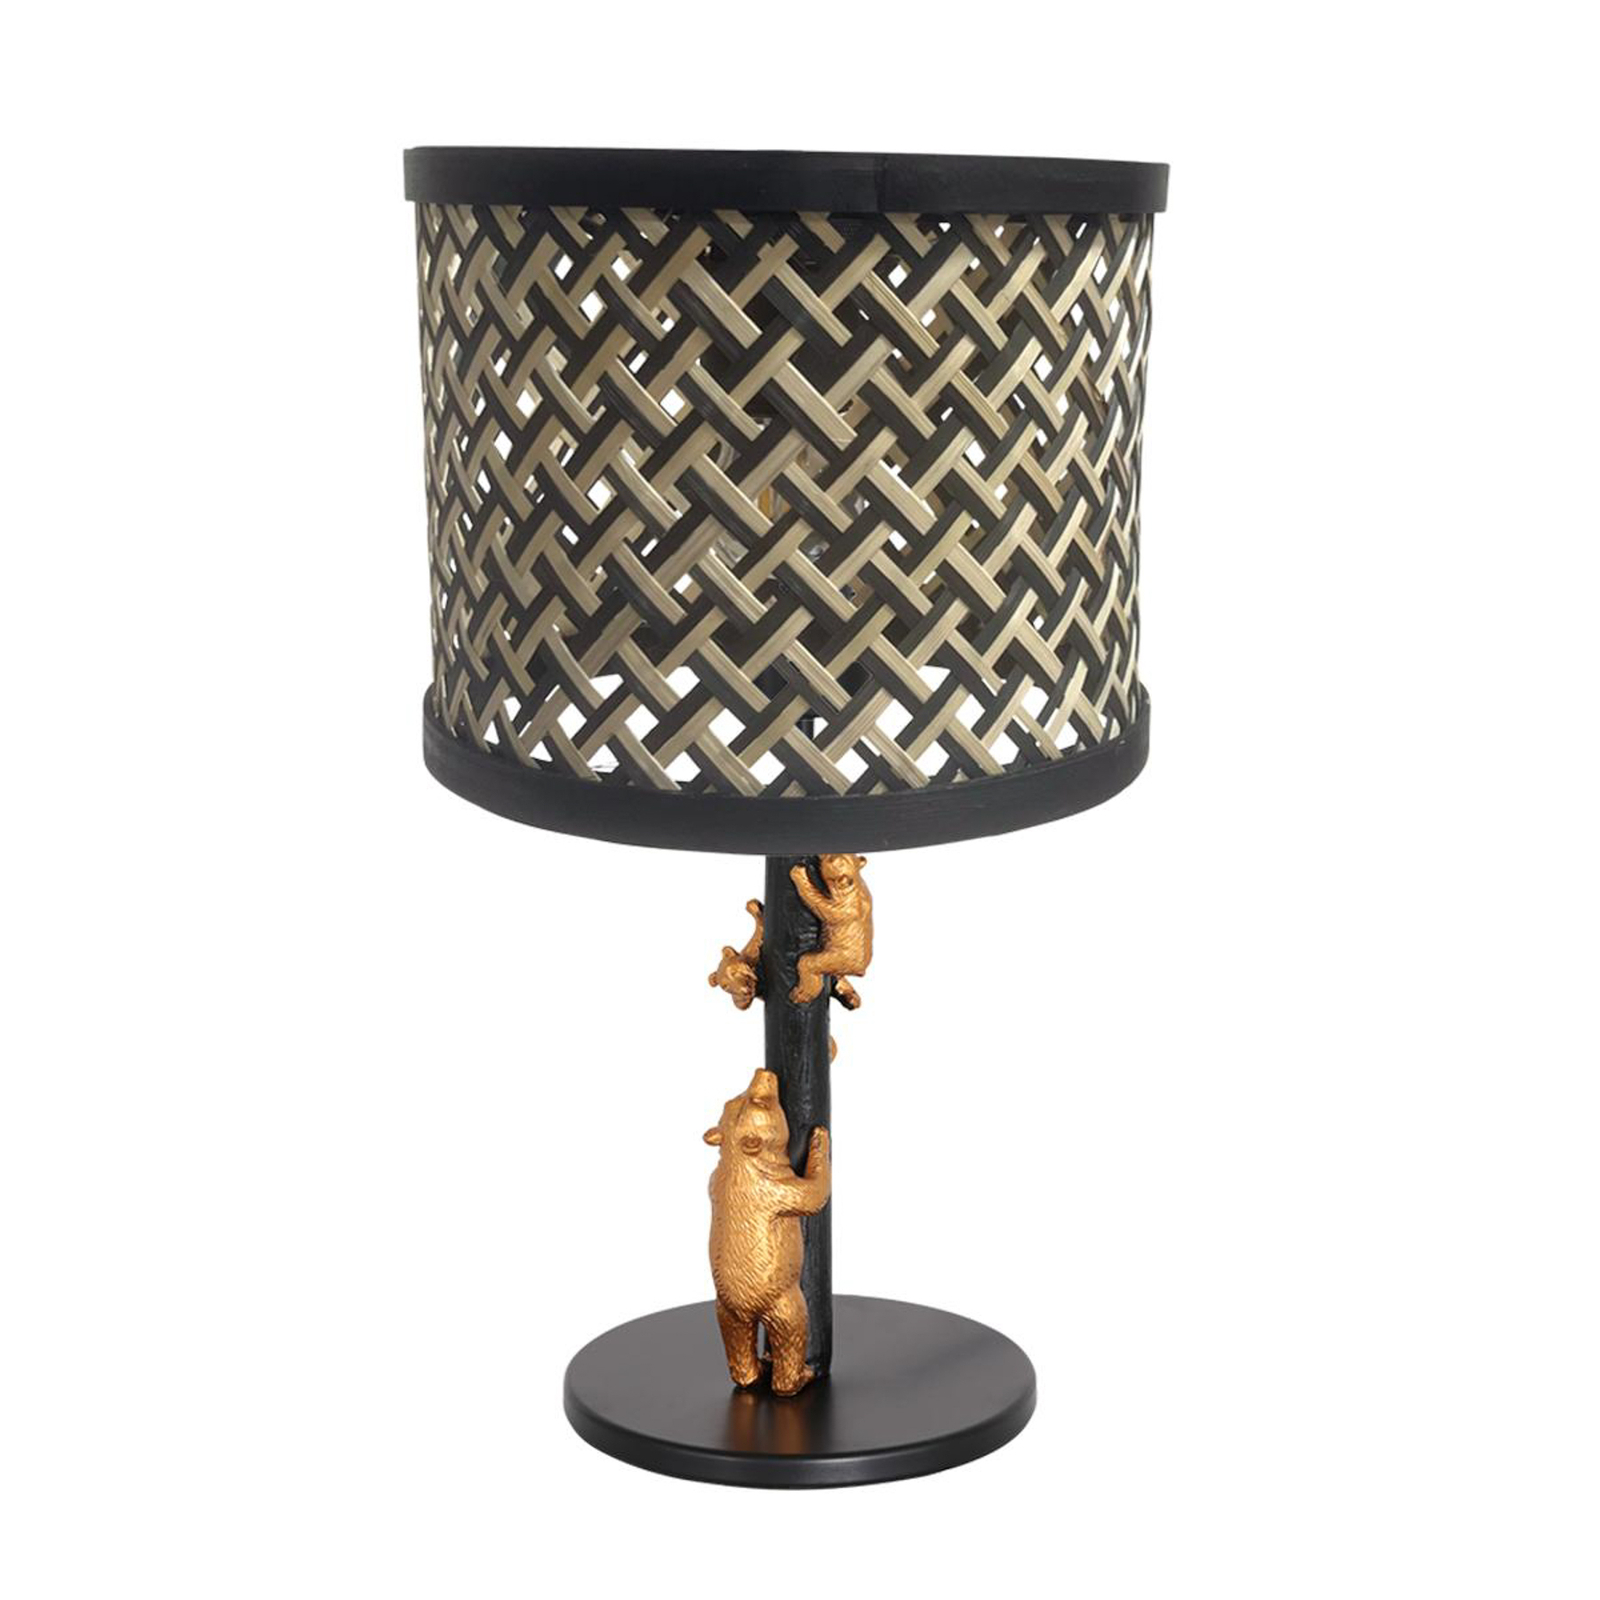 Animaux 3713ZW table lamp, black/natural wickerwork